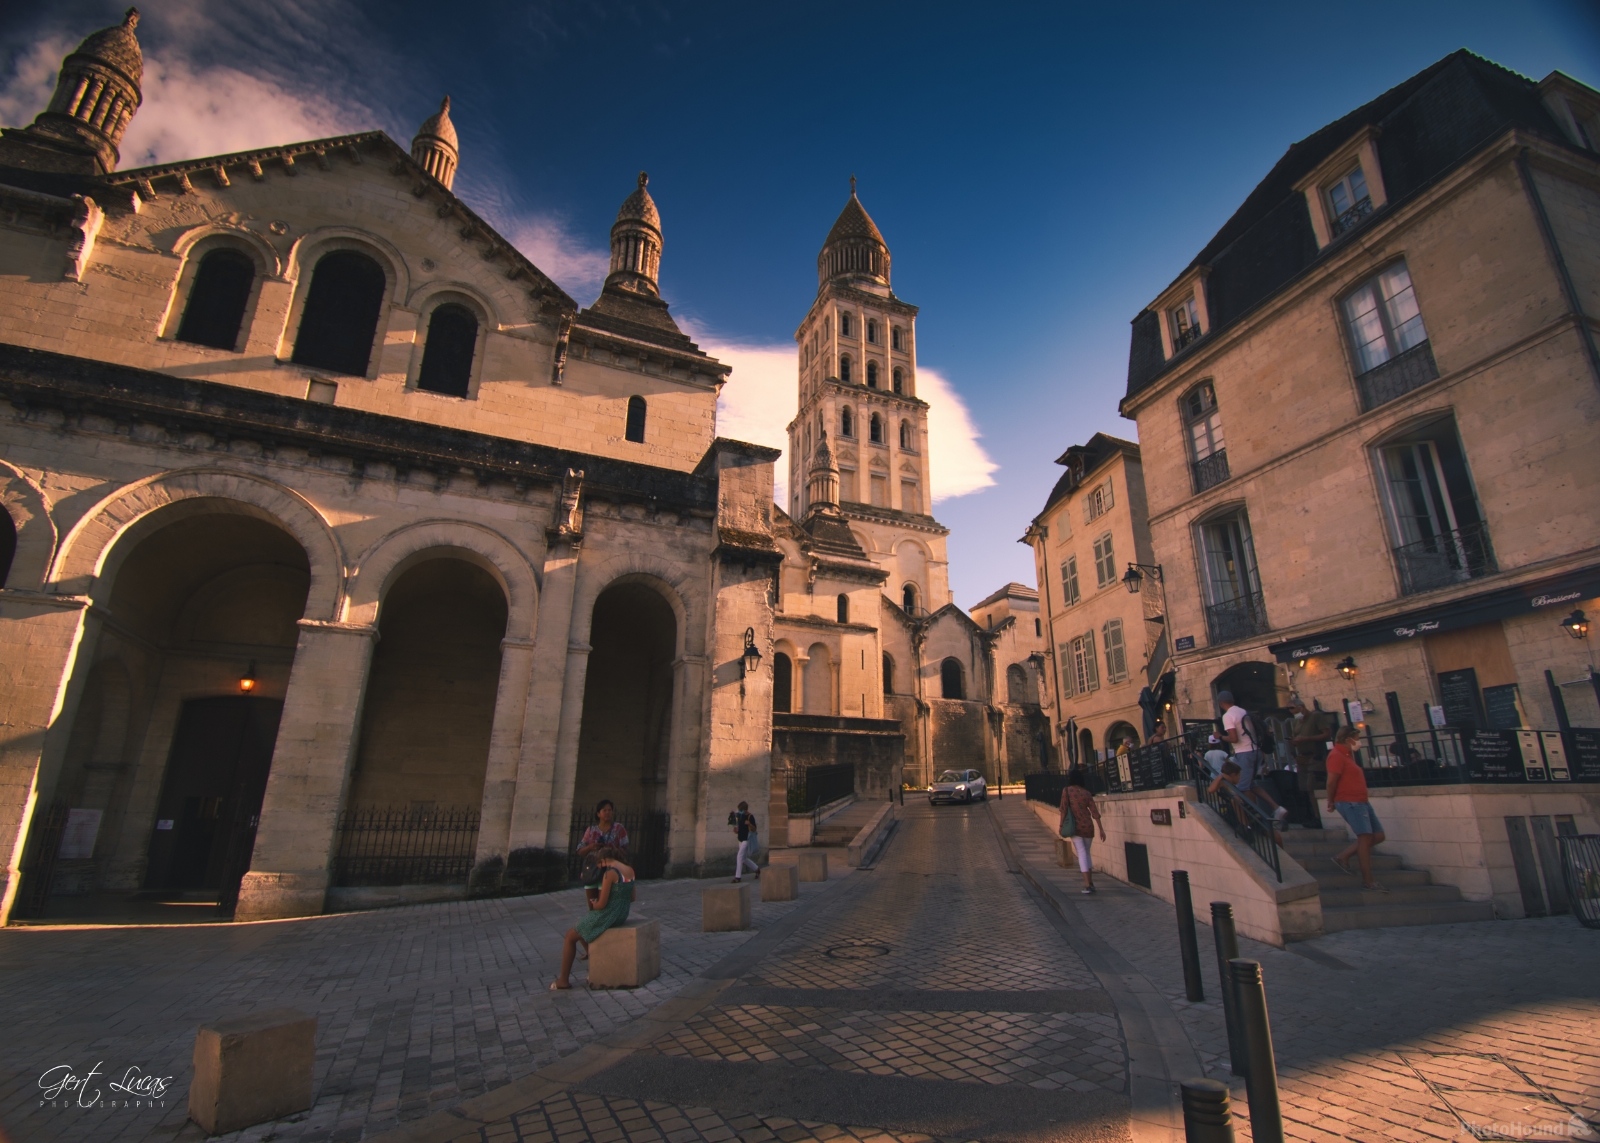 Image of Saint Front Cathedral , Périgueux by Gert Lucas